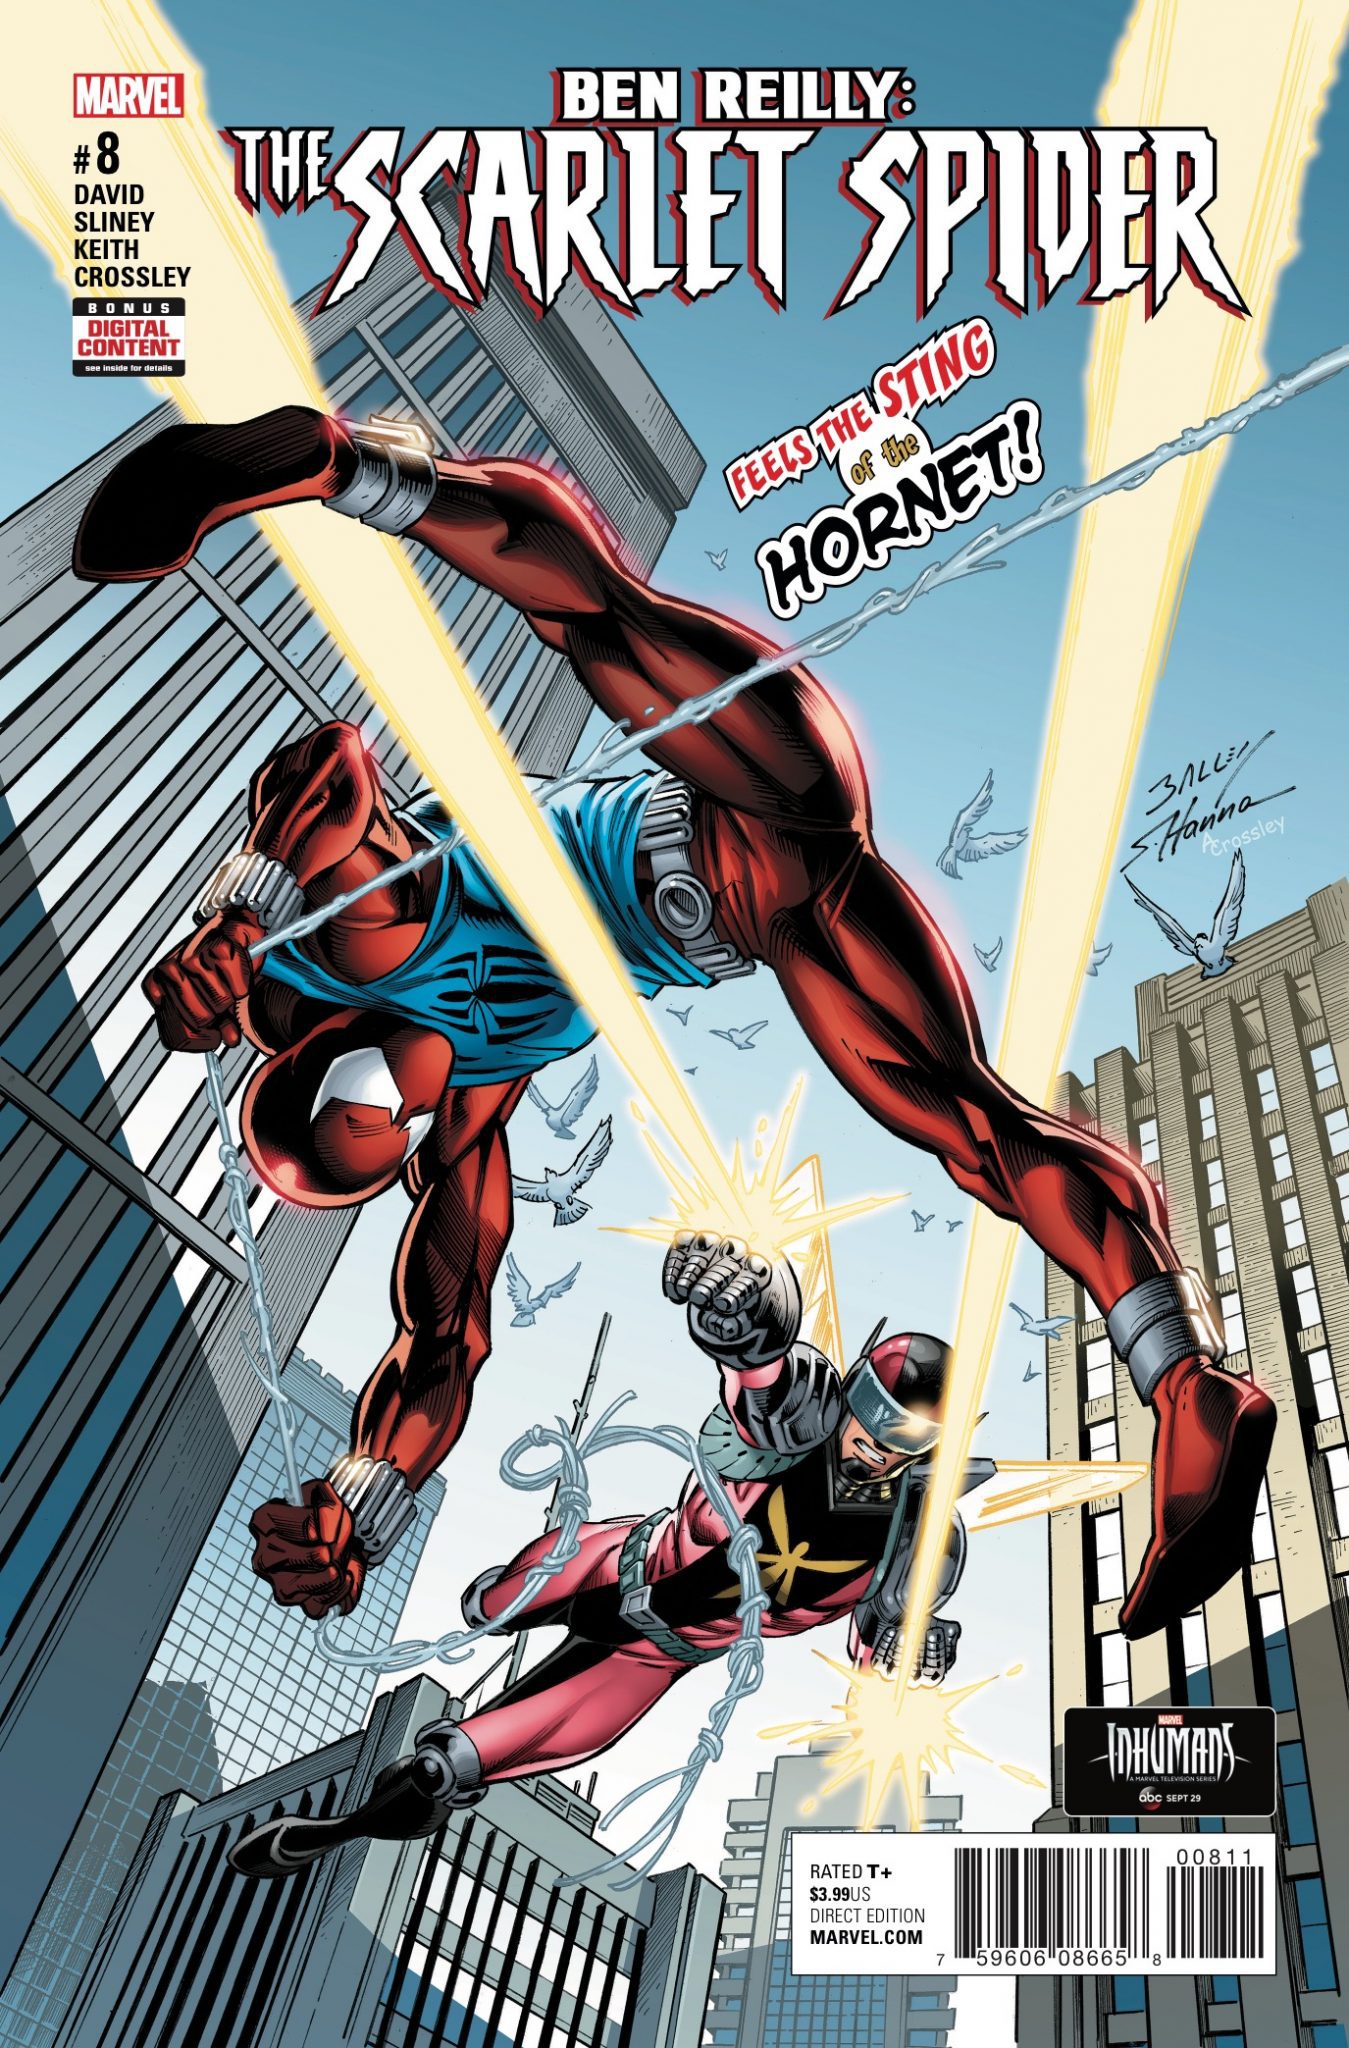 Ben Reilly: The Scarlet Spider #8 Review